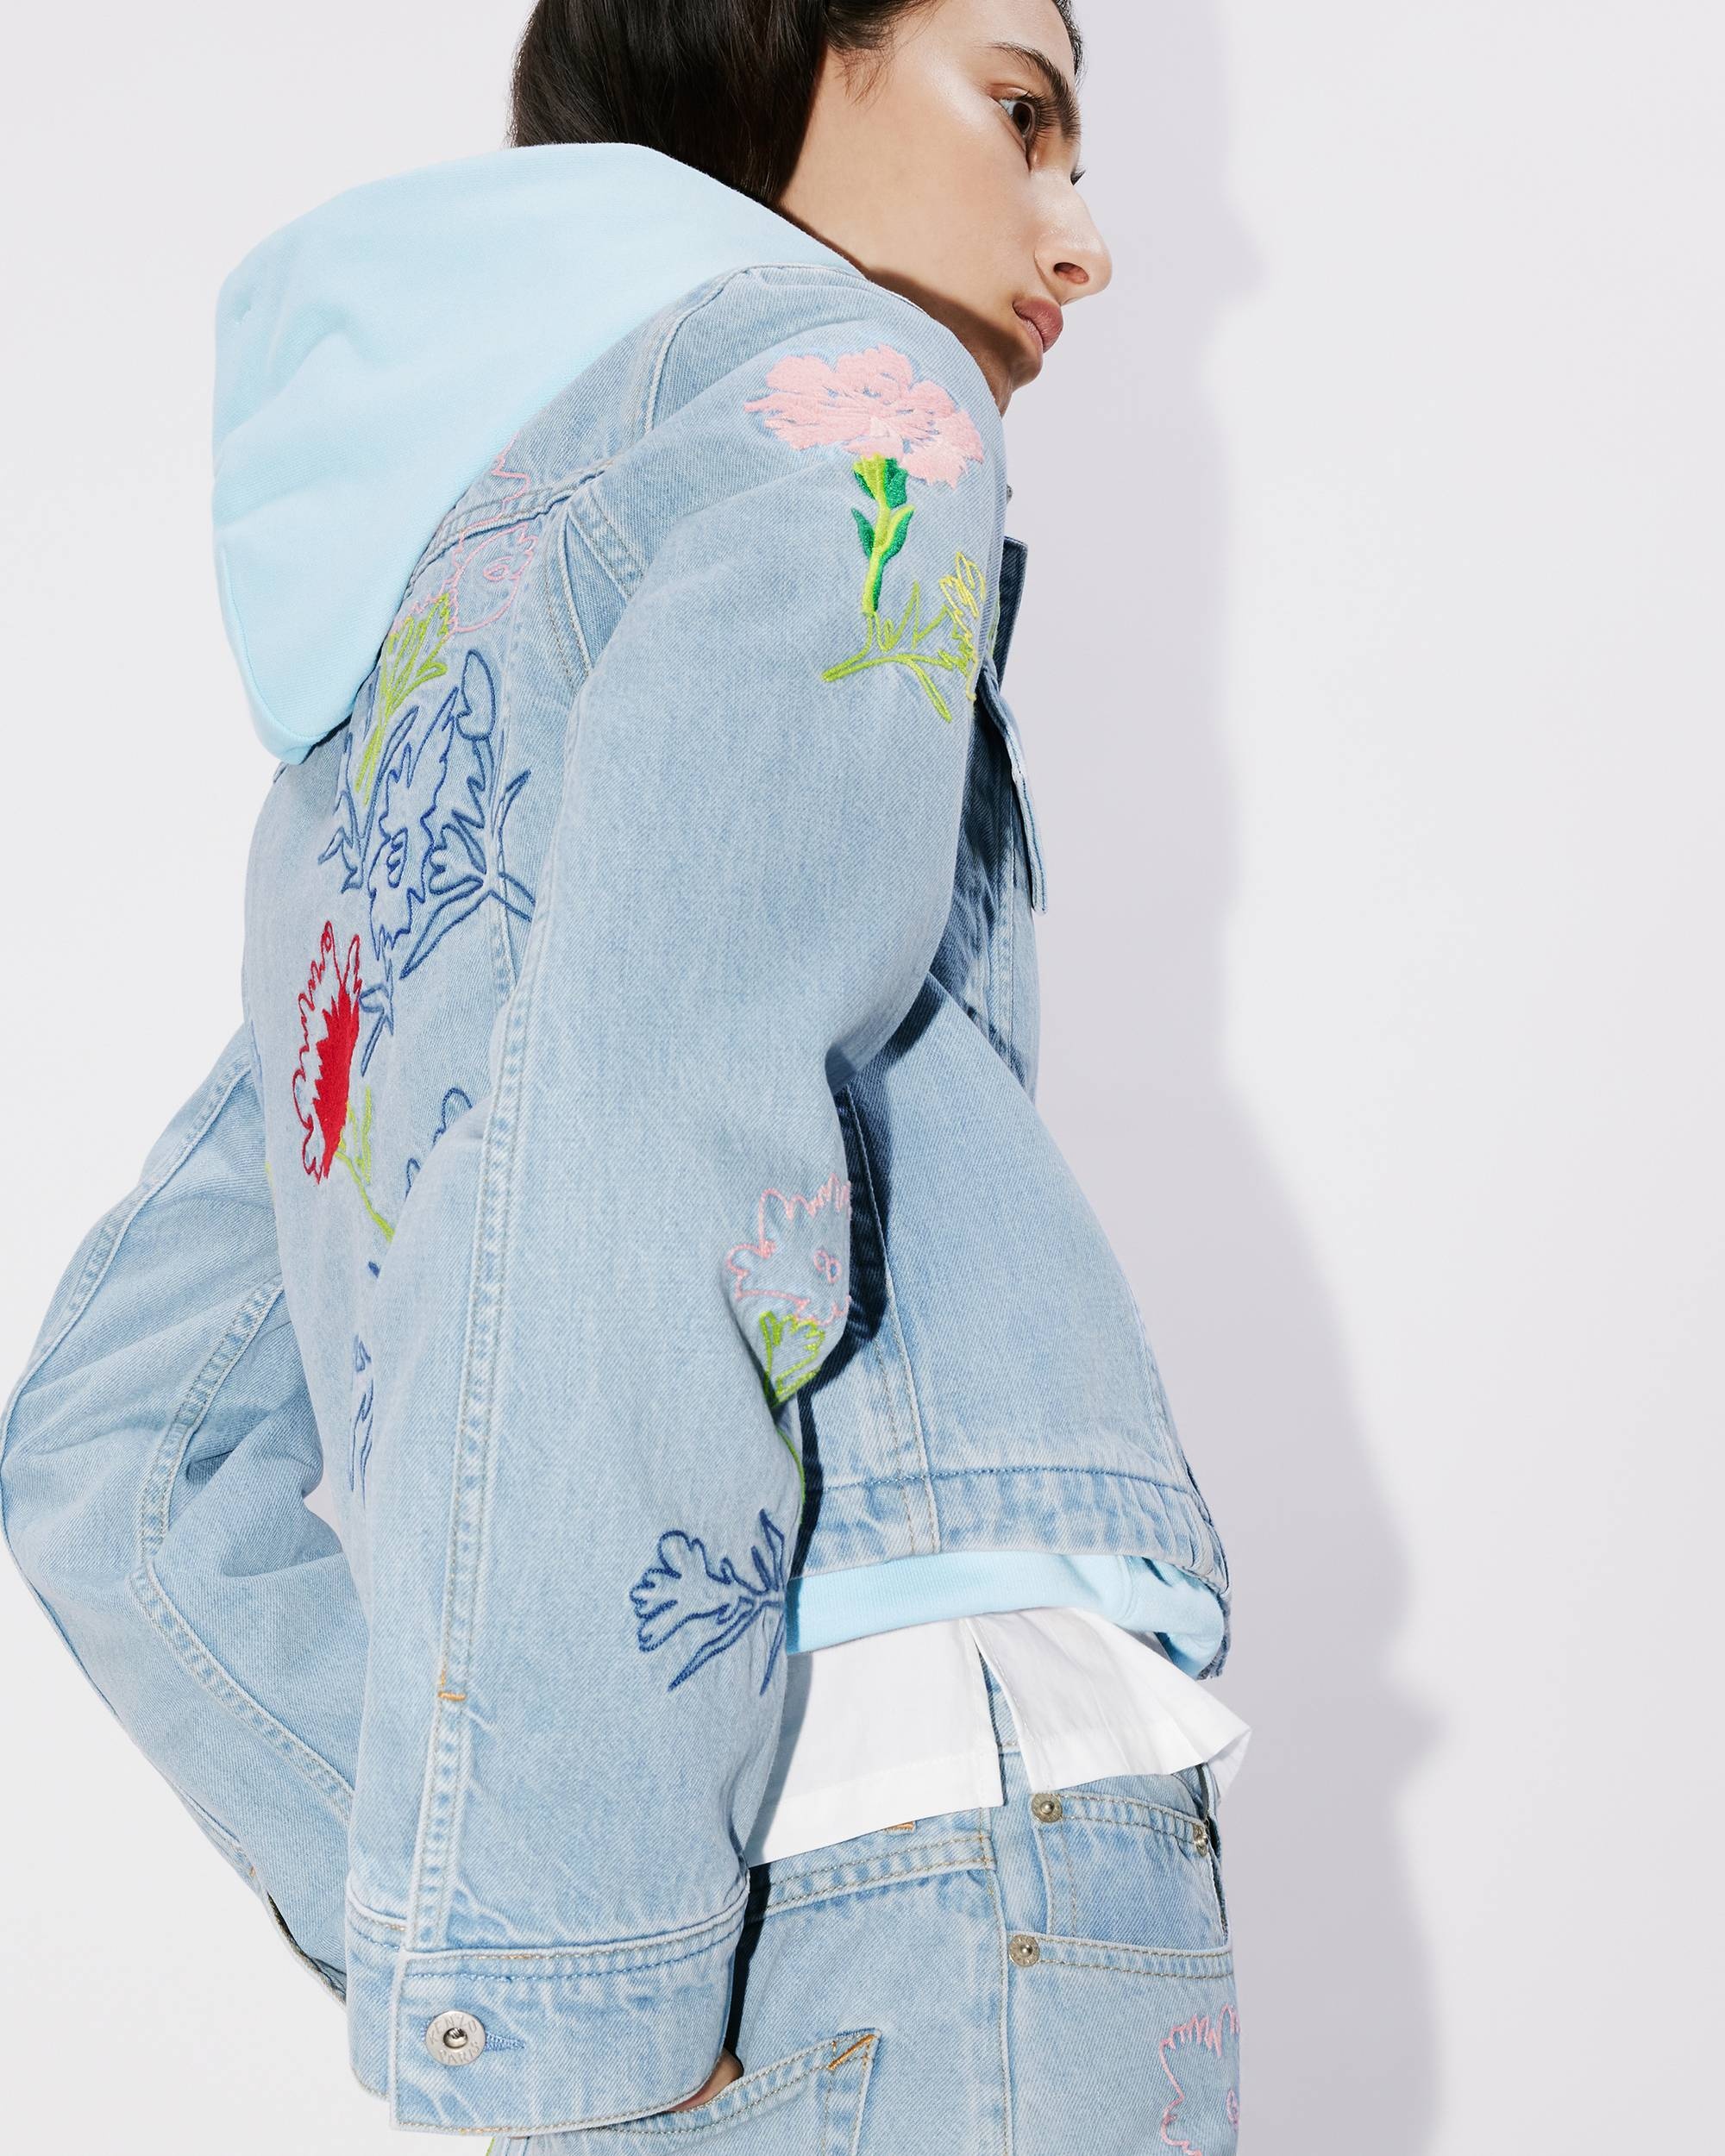 'KENZO Drawn Flowers' embroidered trucker jacket - 7